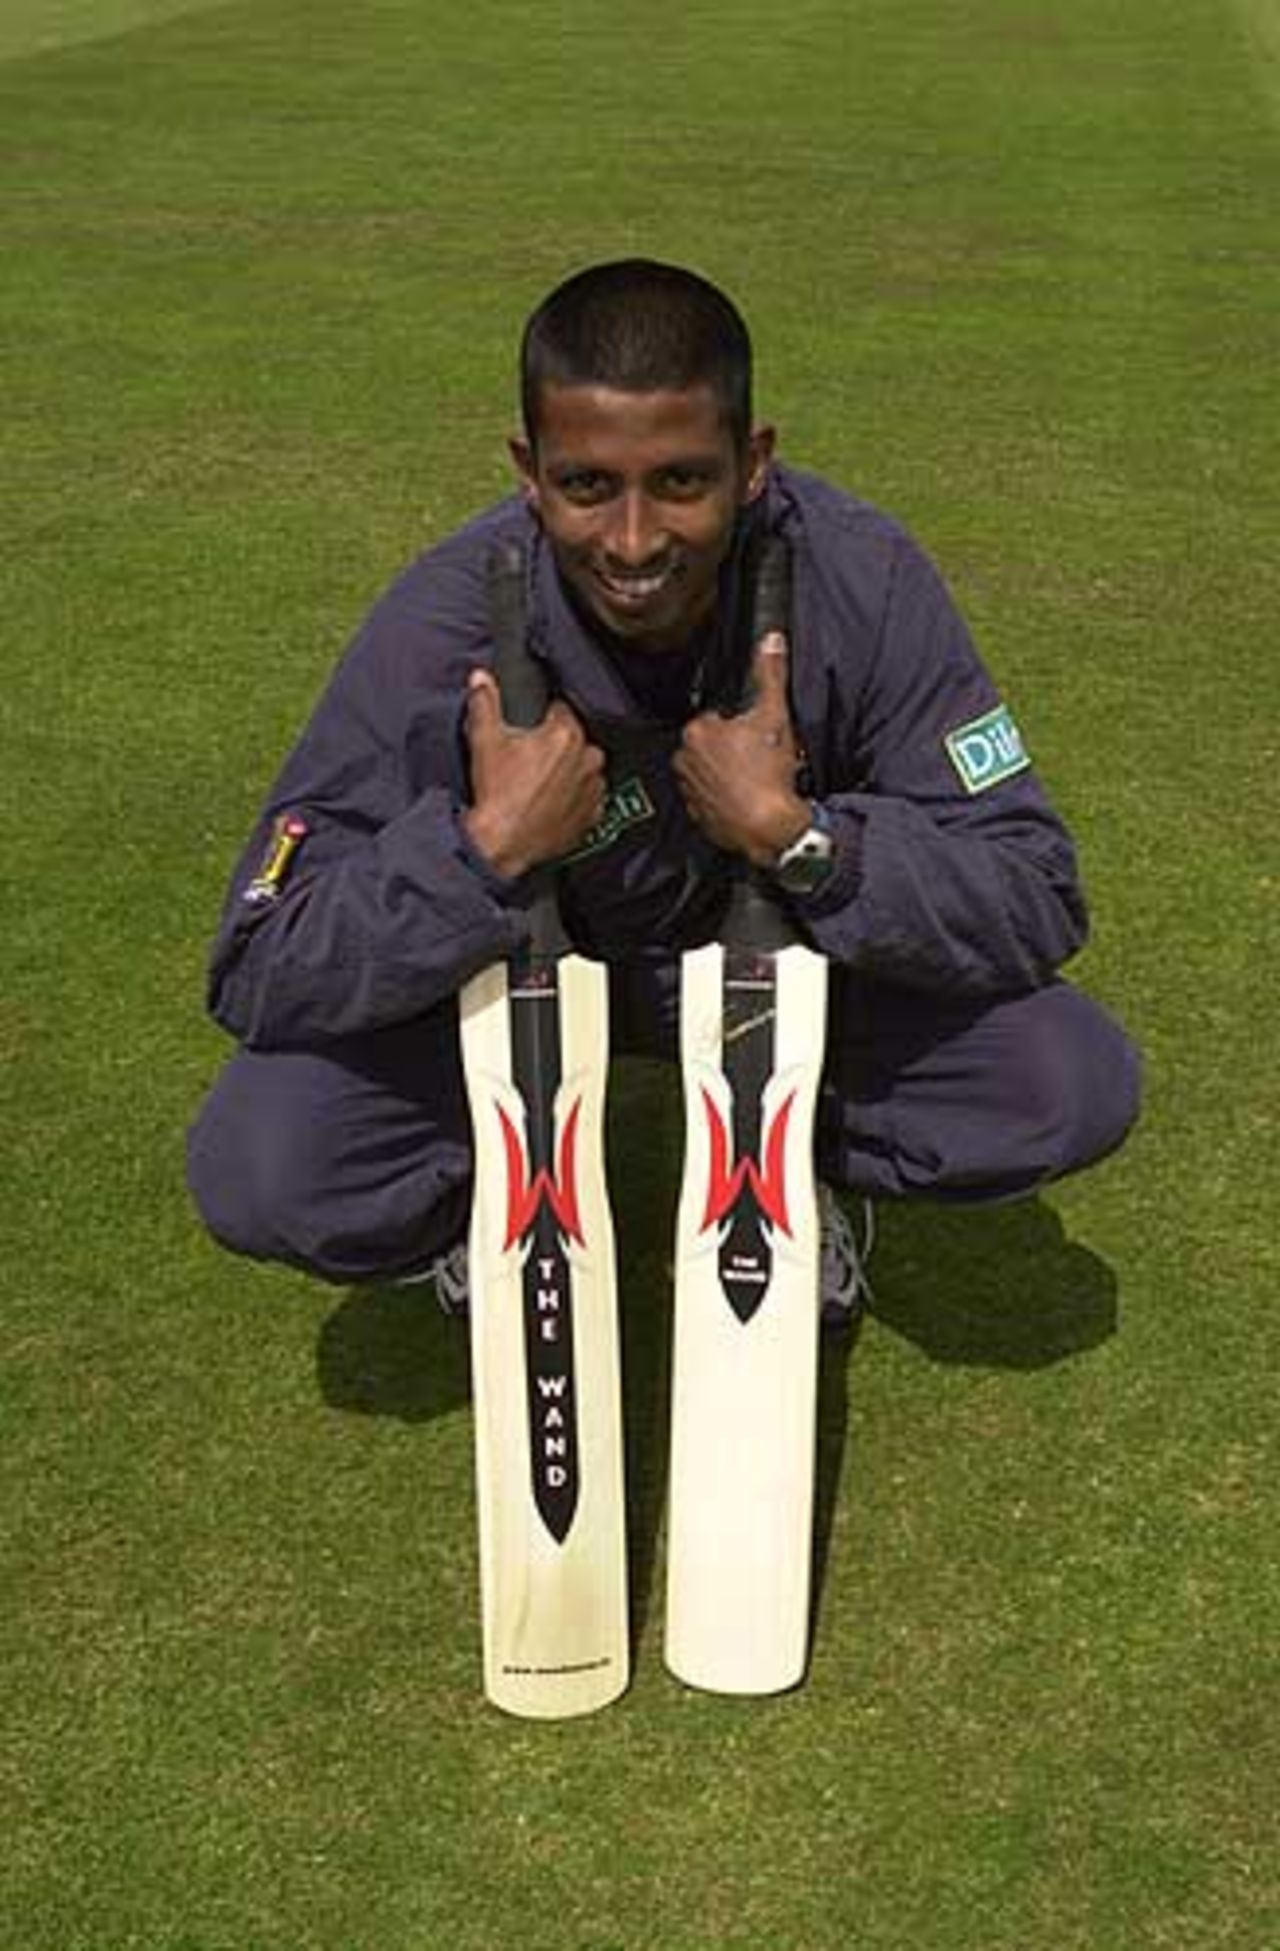 Russel Arnold pleased to demonstrate his new Woodworm Wand, Northamptonshire v Sri Lankans, June 2002